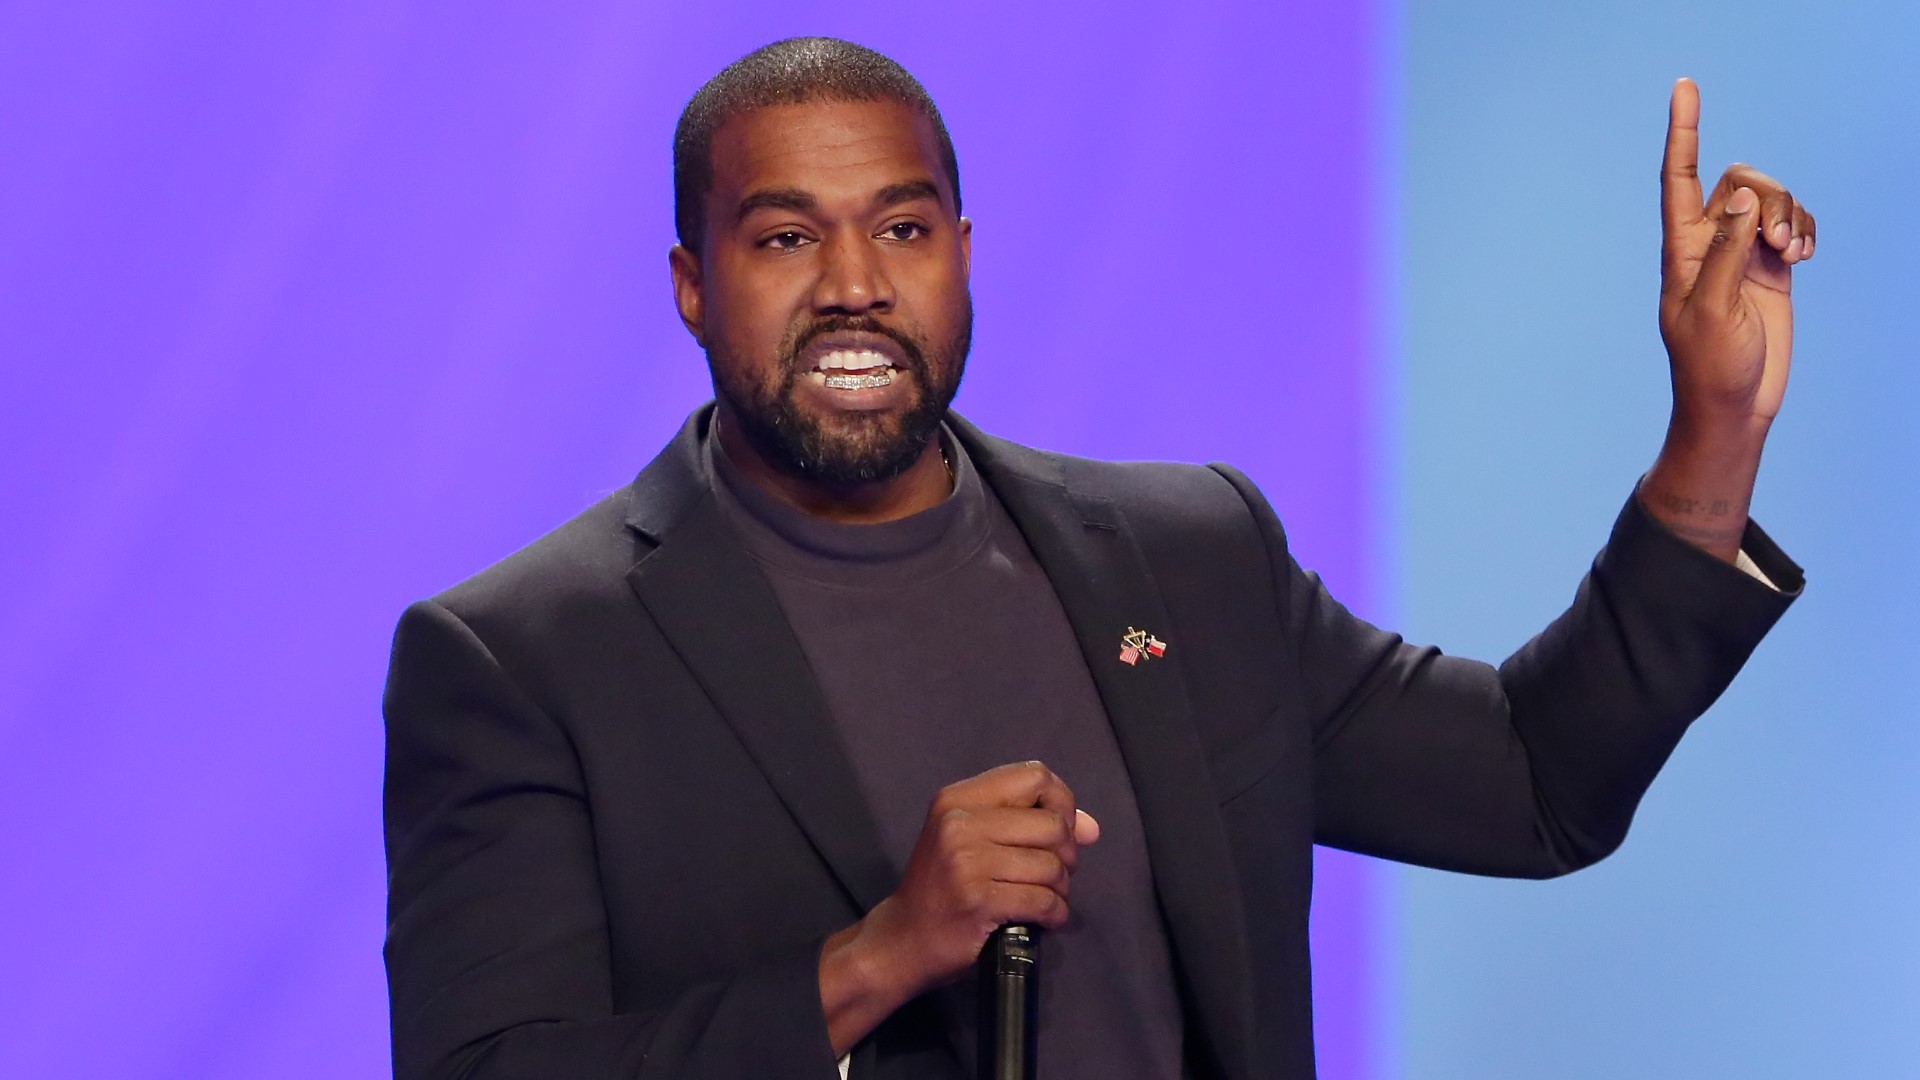 The group Rasean Carlton alleges rapper Kanye West is violating Arizona law by running as an Independent but is registered as a Republican.